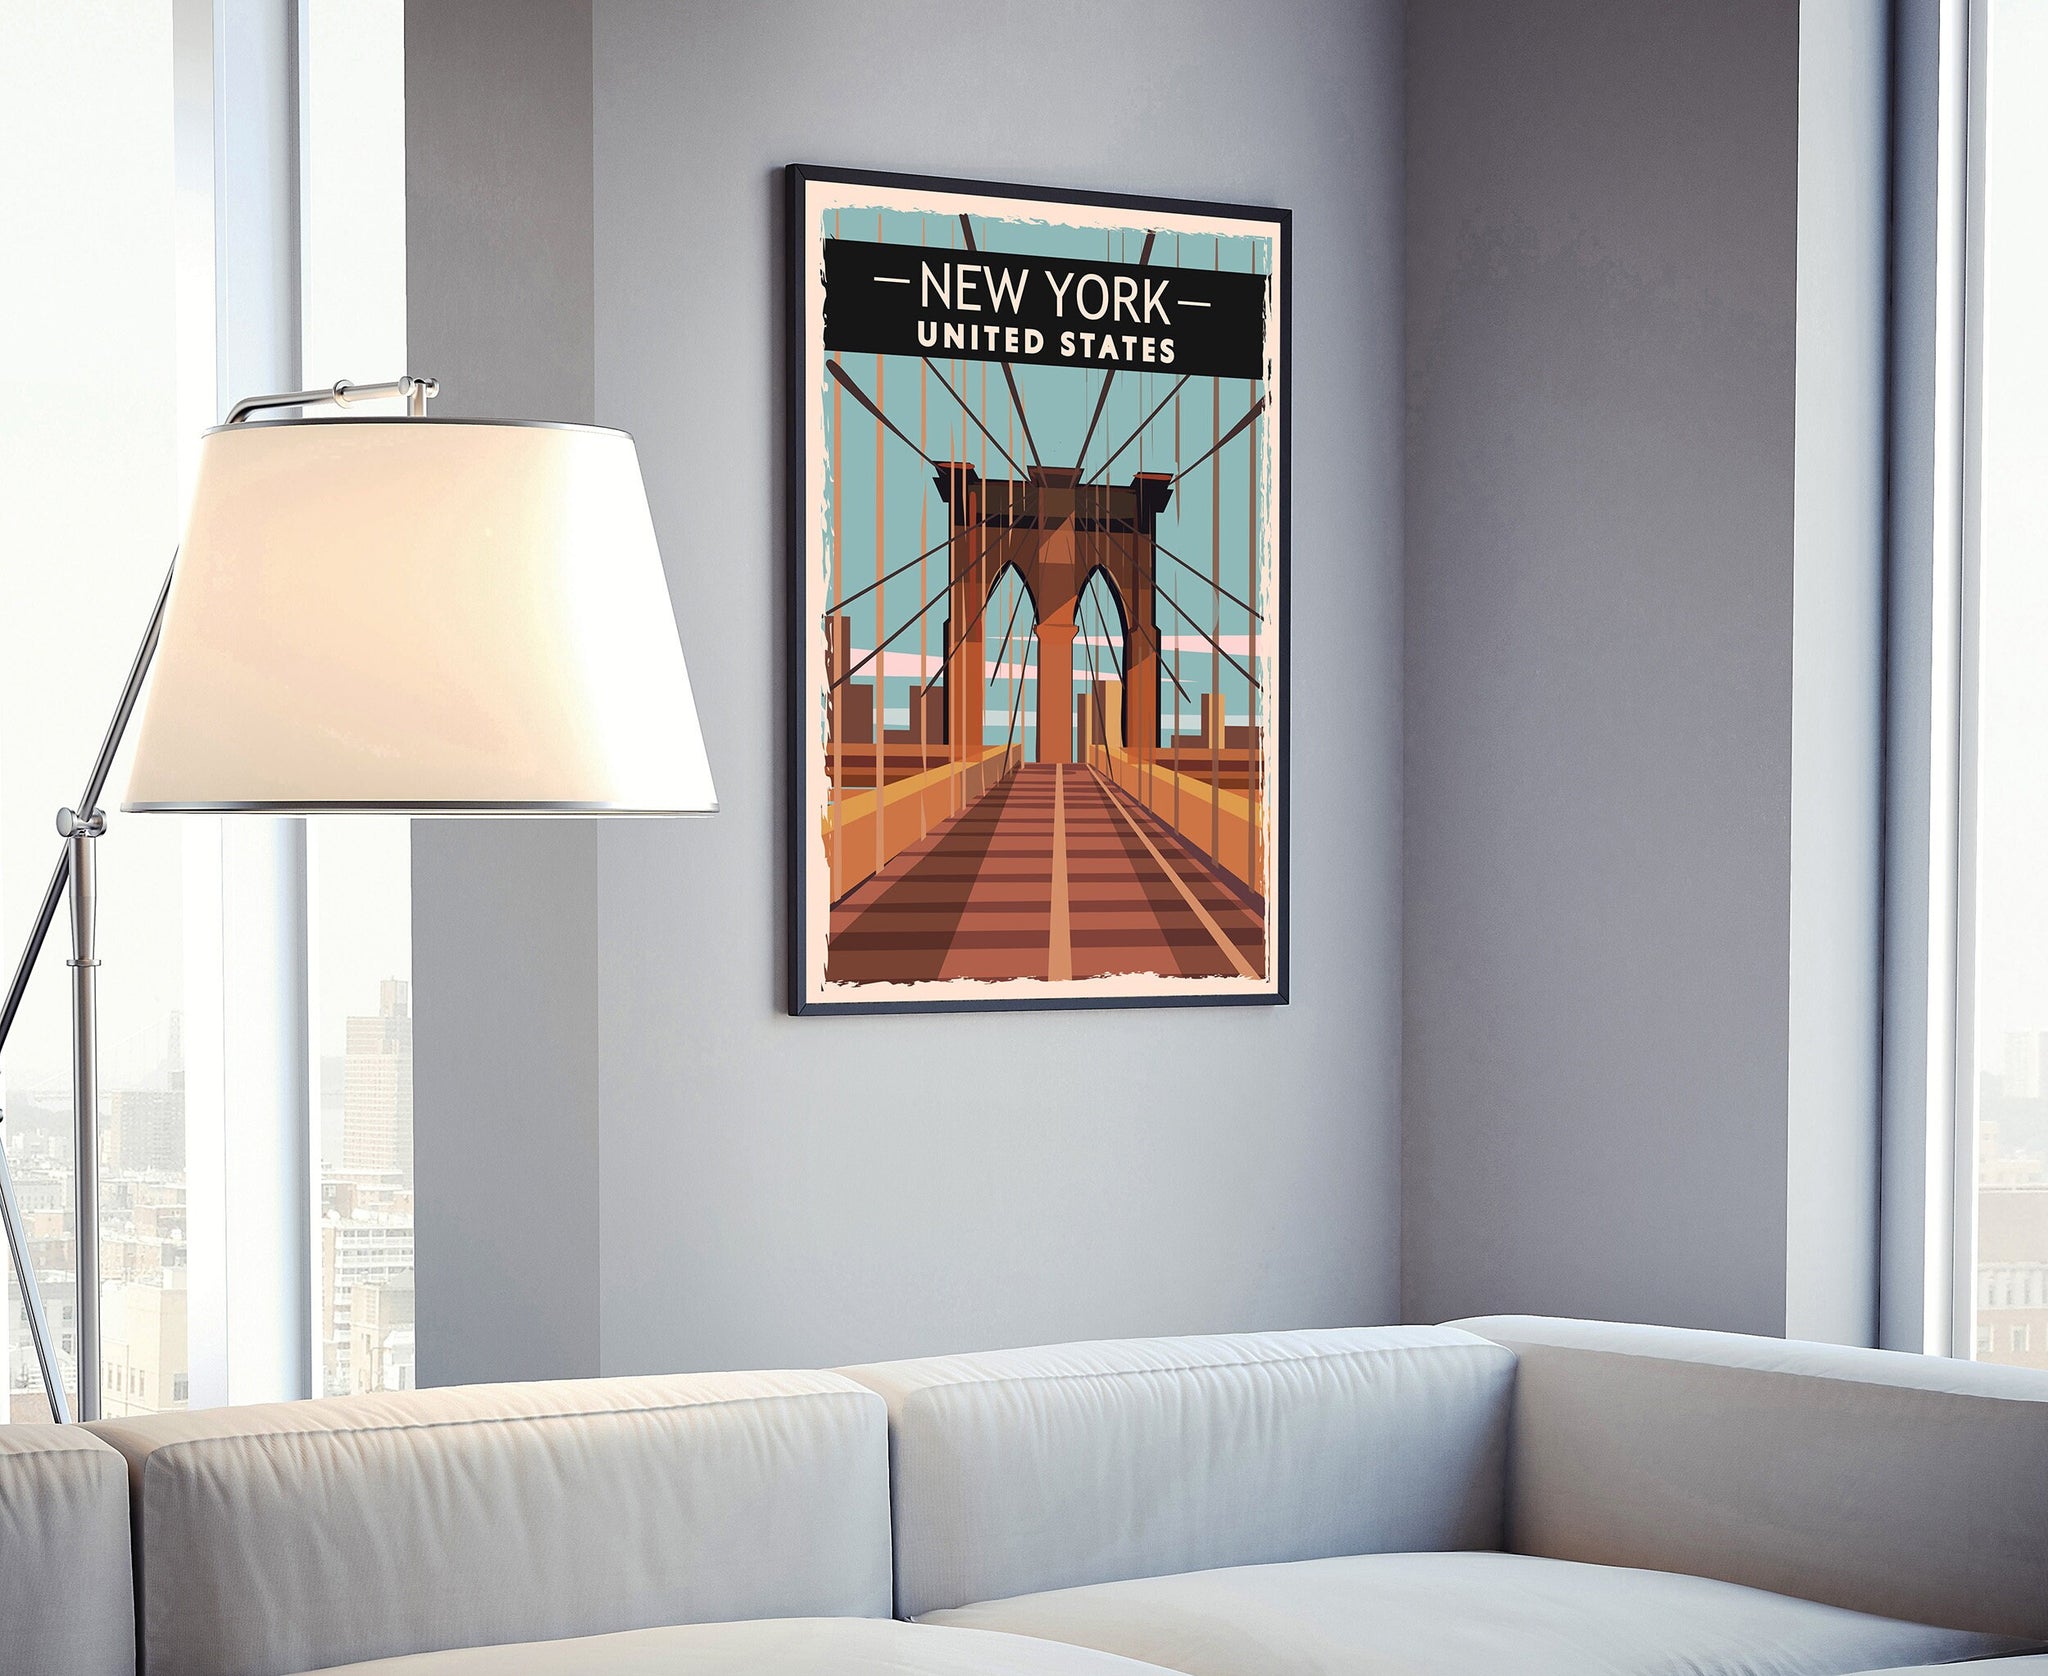 Retro Style Travel Poster, New York Vintage Rustic Poster Print, Home Wall Art, Office Wall Decor, Poster Prints, New York, State Map Poster